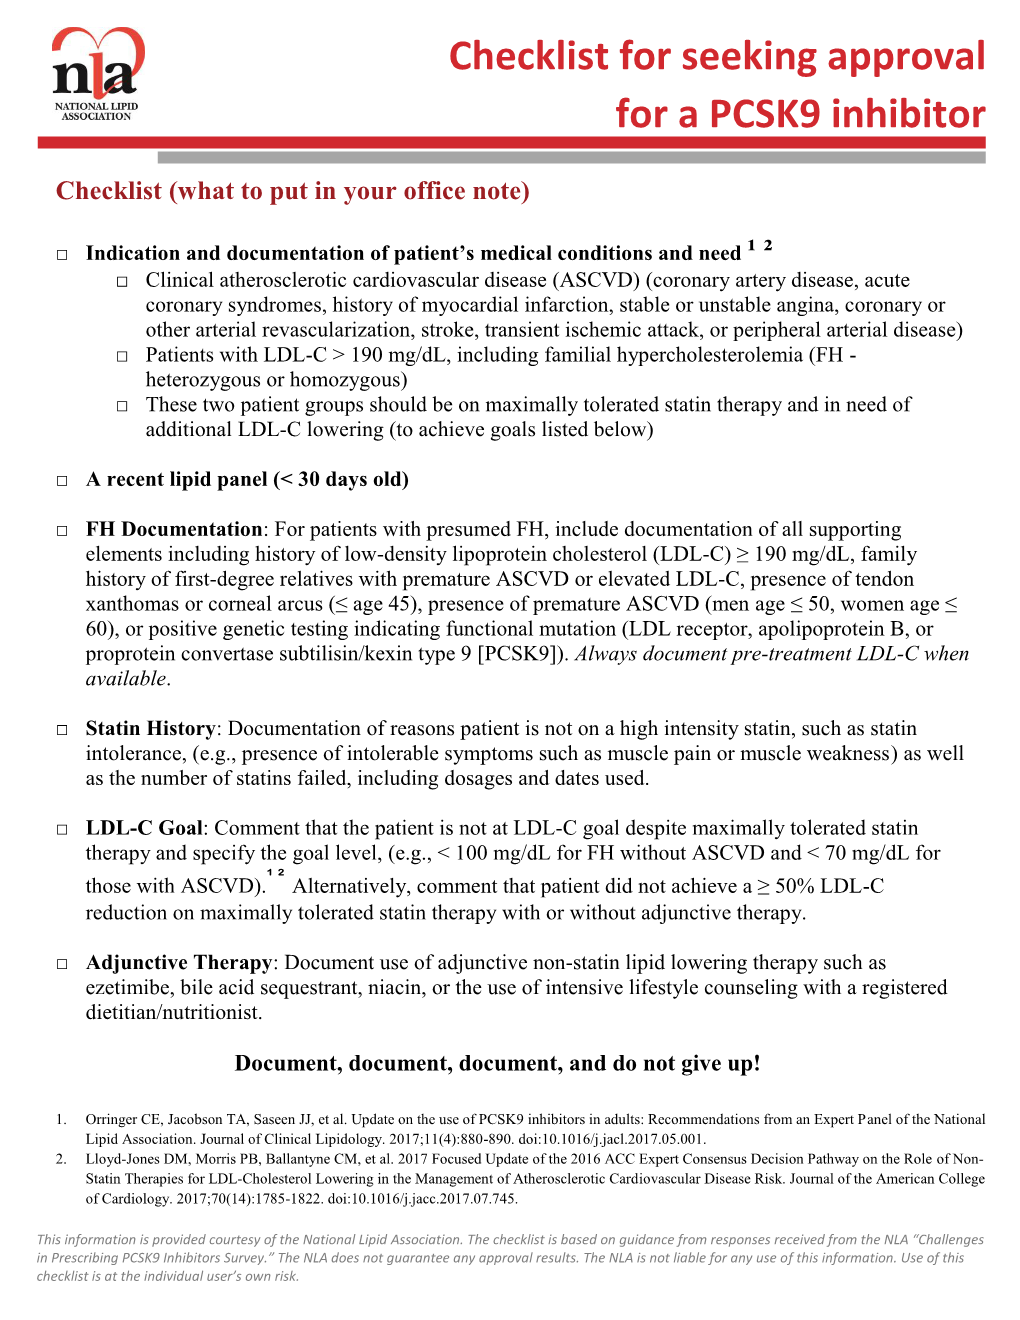 Checklist for Seeking Approval for a PCSK9 Inhibitor